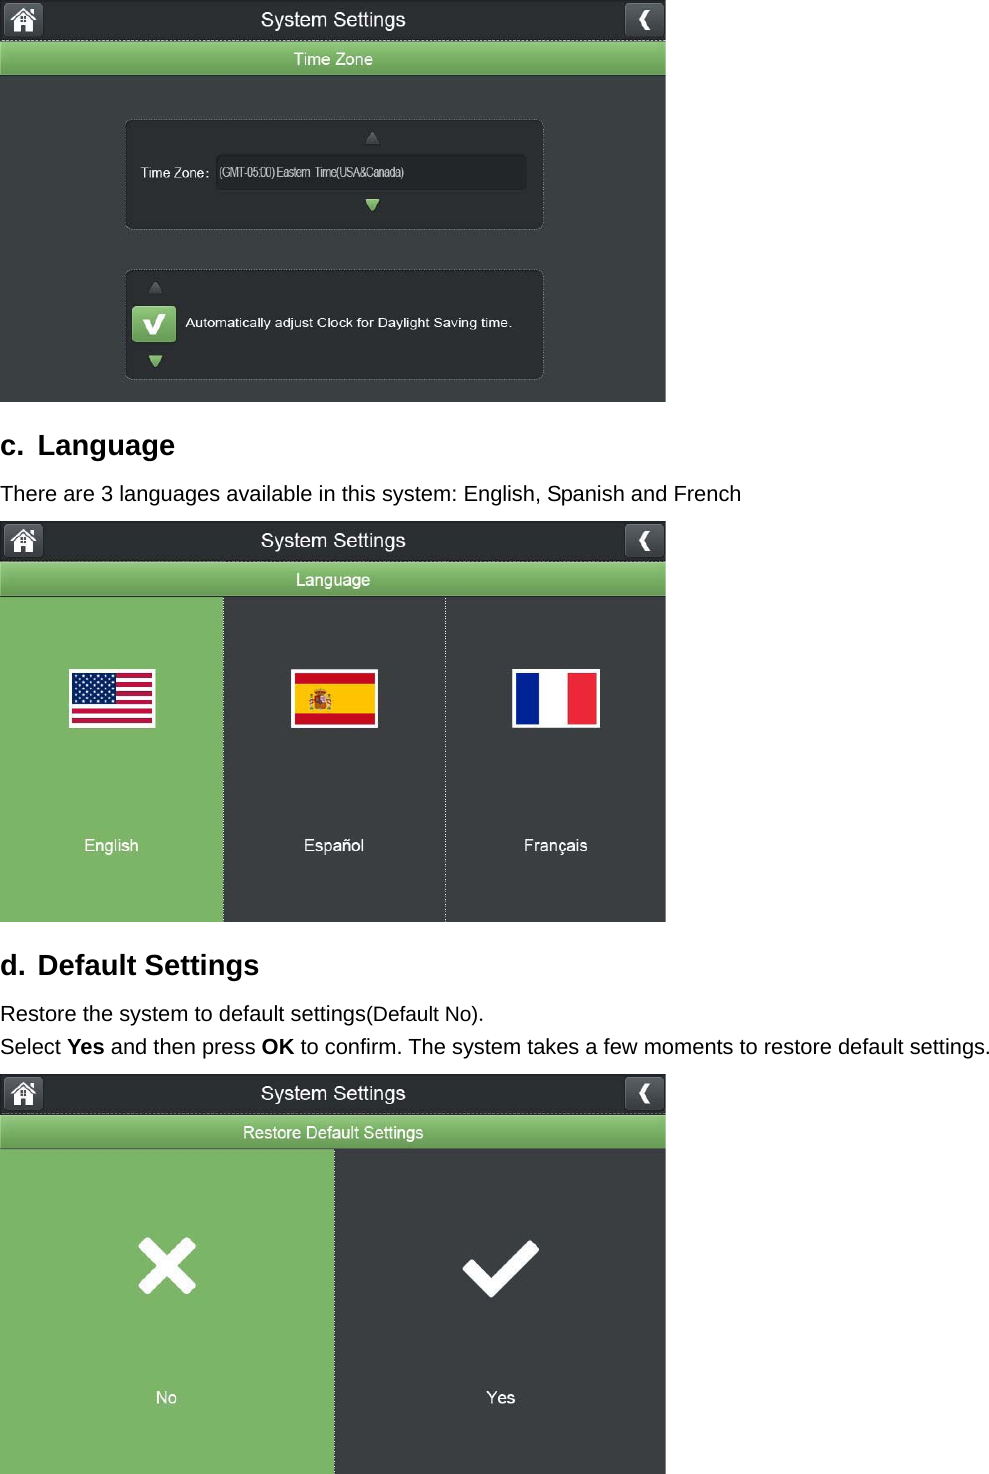  c. Language There are 3 languages available in this system: English, Spanish and French  d. Default Settings Restore the system to default settings(Default No).   Select Yes and then press OK to confirm. The system takes a few moments to restore default settings.  